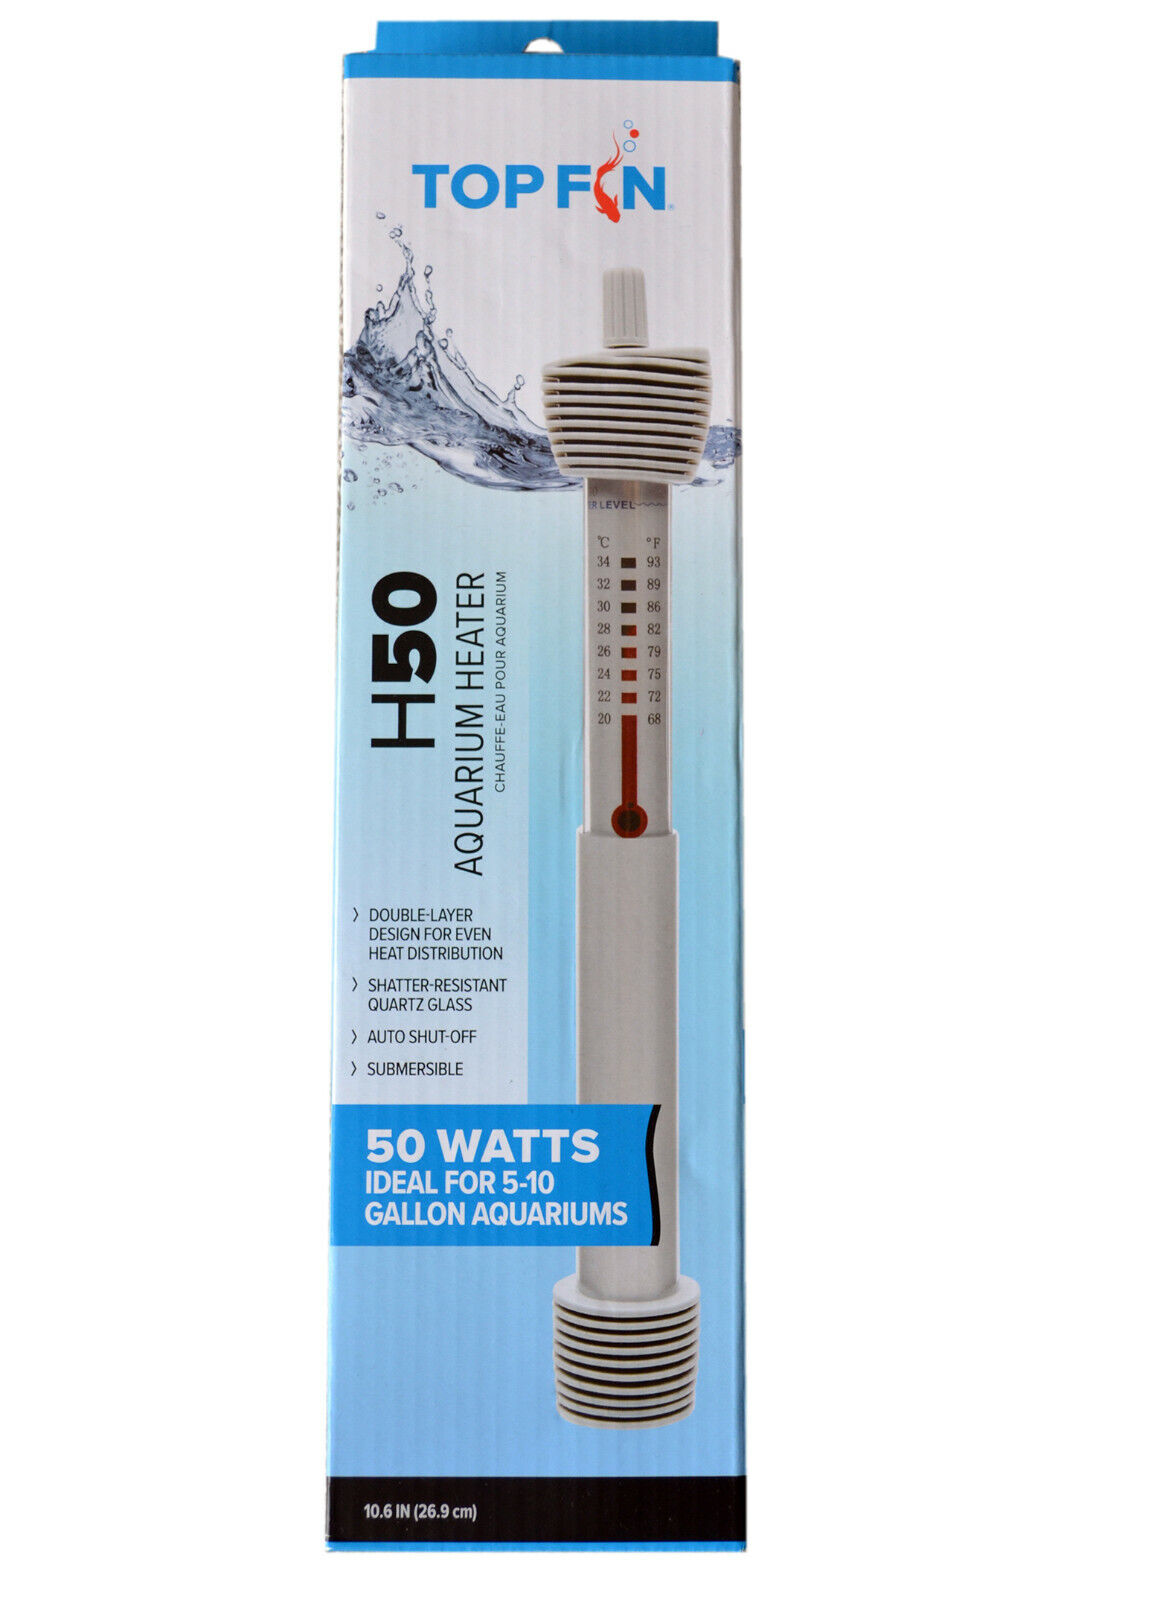 Top Fin H50 Submersible Aquarium Heater 50w Ideal for 5-10 Gallon New in Box